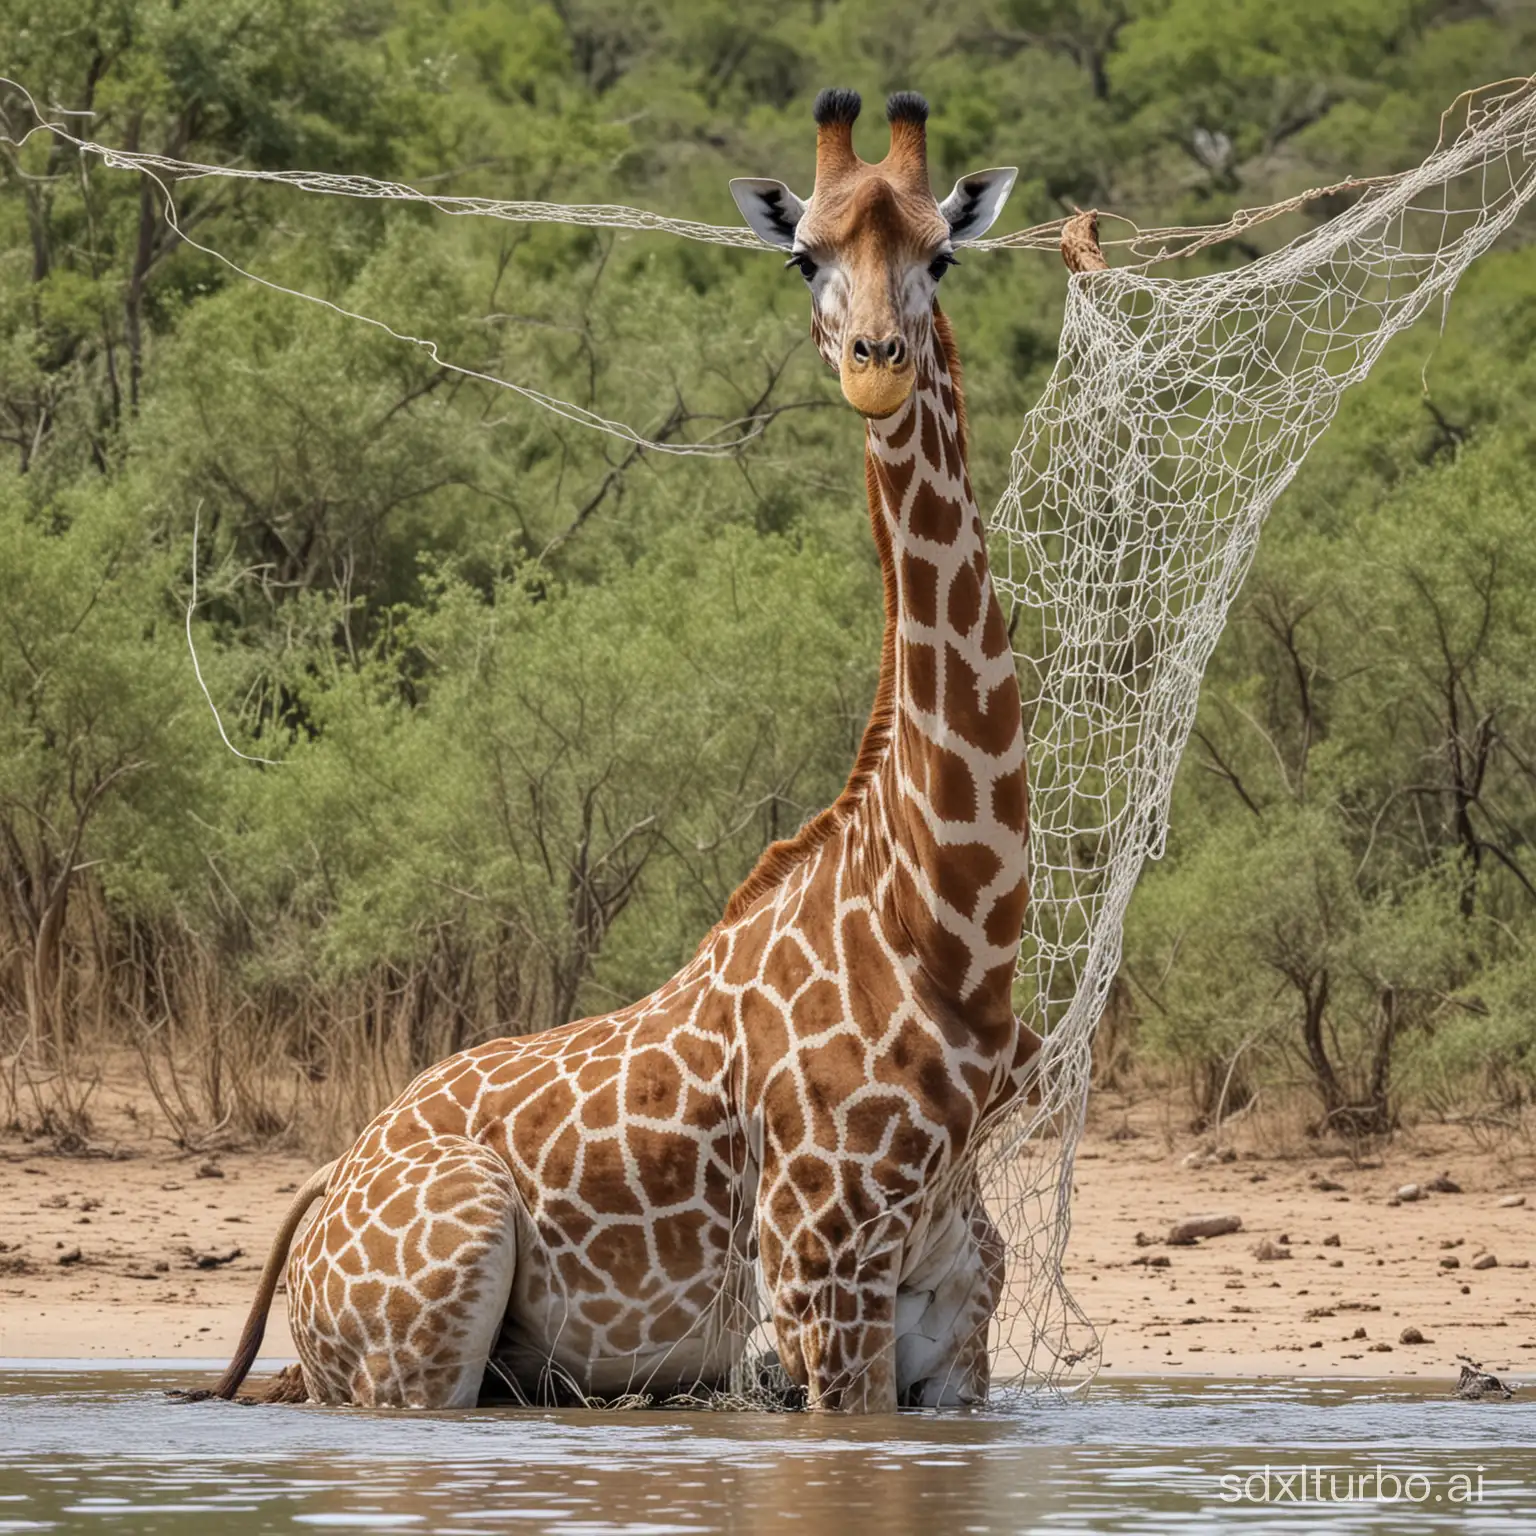 Giraffe-Trapped-in-Fishing-Net-Wildlife-Conservation-Dilemma